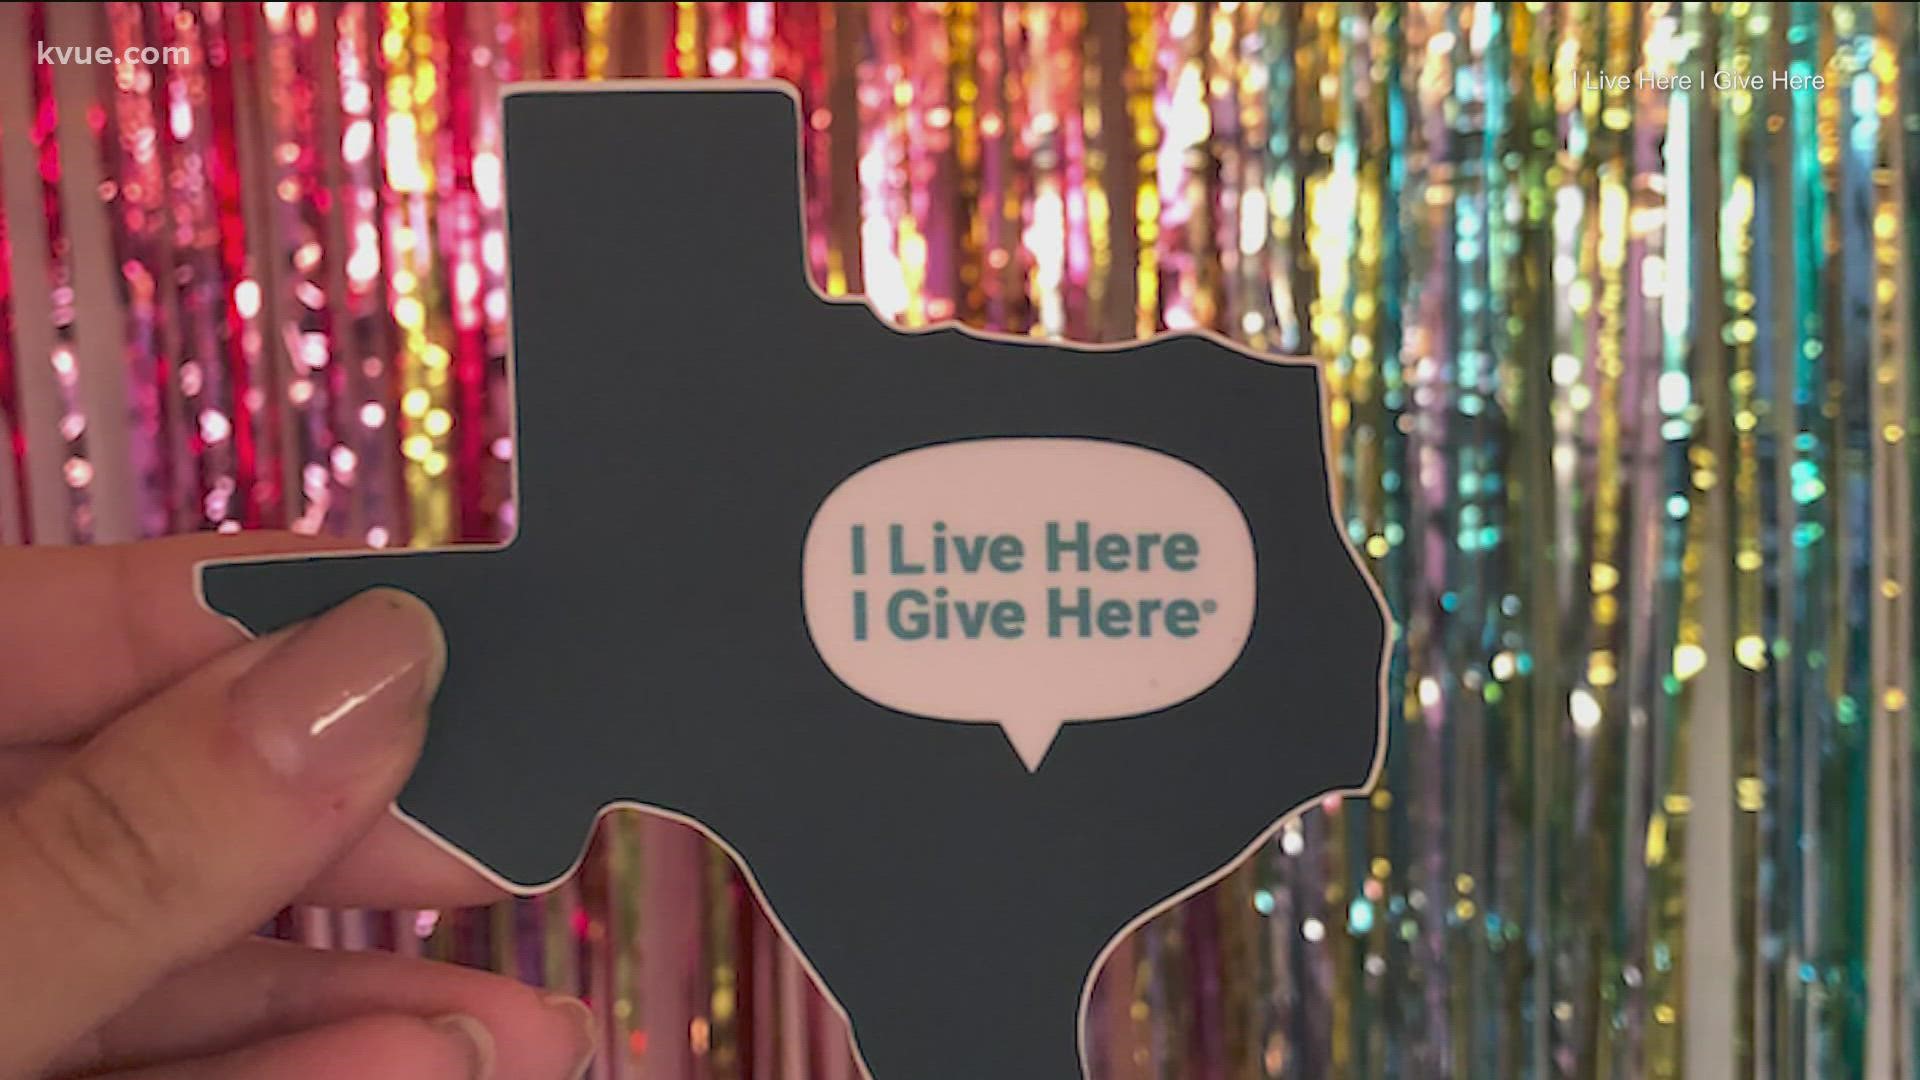 Central Texas has been through a lot in the past year and a half. KVUE's Conner Board tells you how you can help this Giving Tuesday.